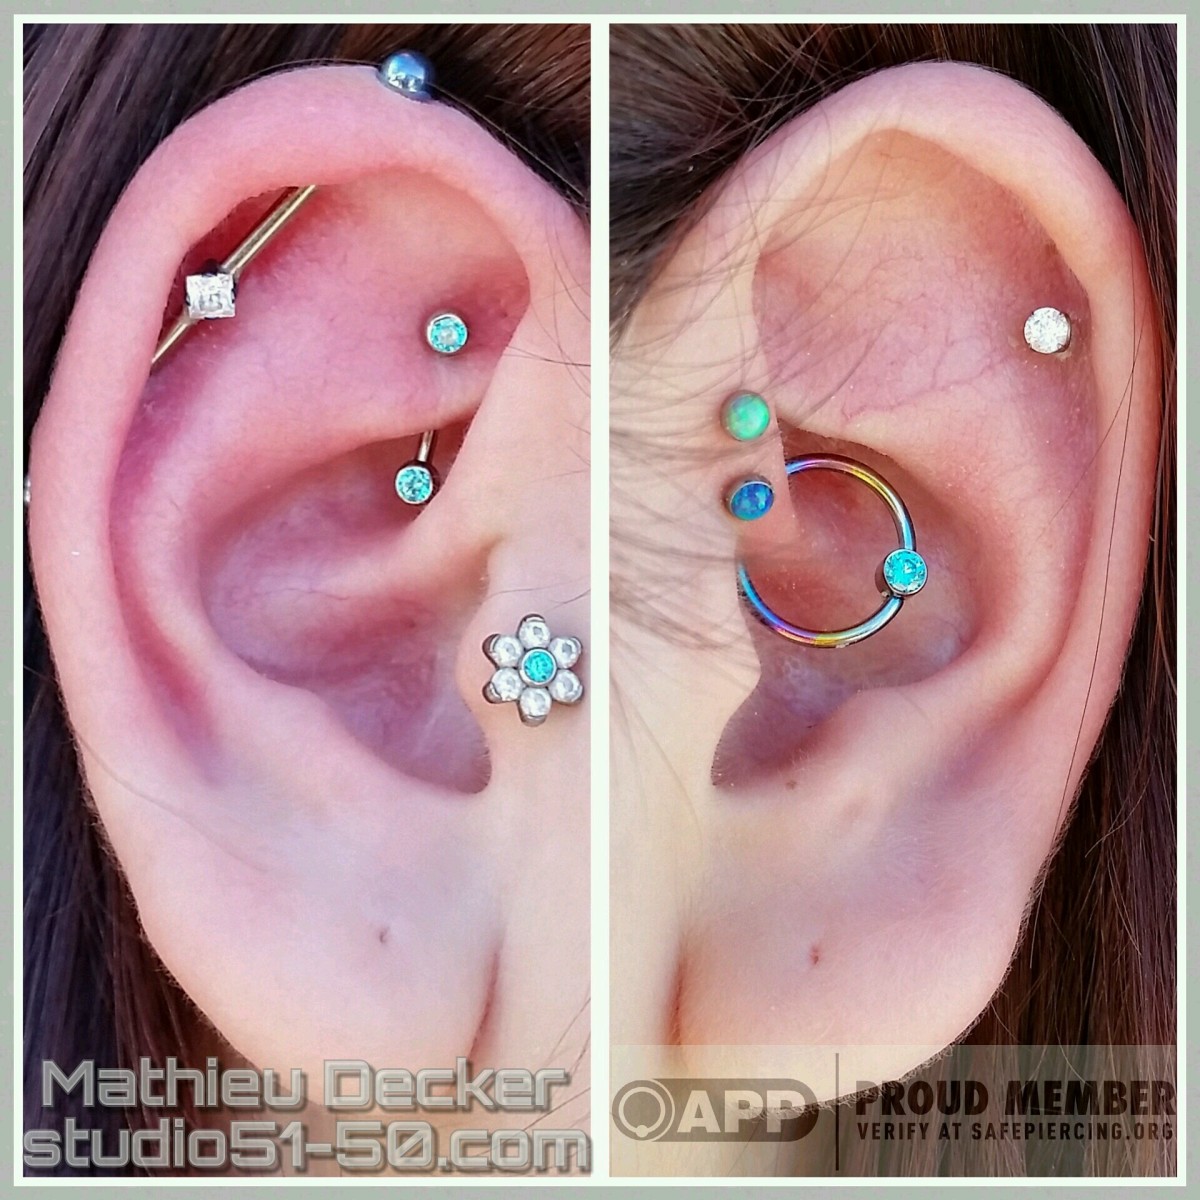 (Left) Industrial, rook, and tragus; (Right) Helix, forward helix, and daith